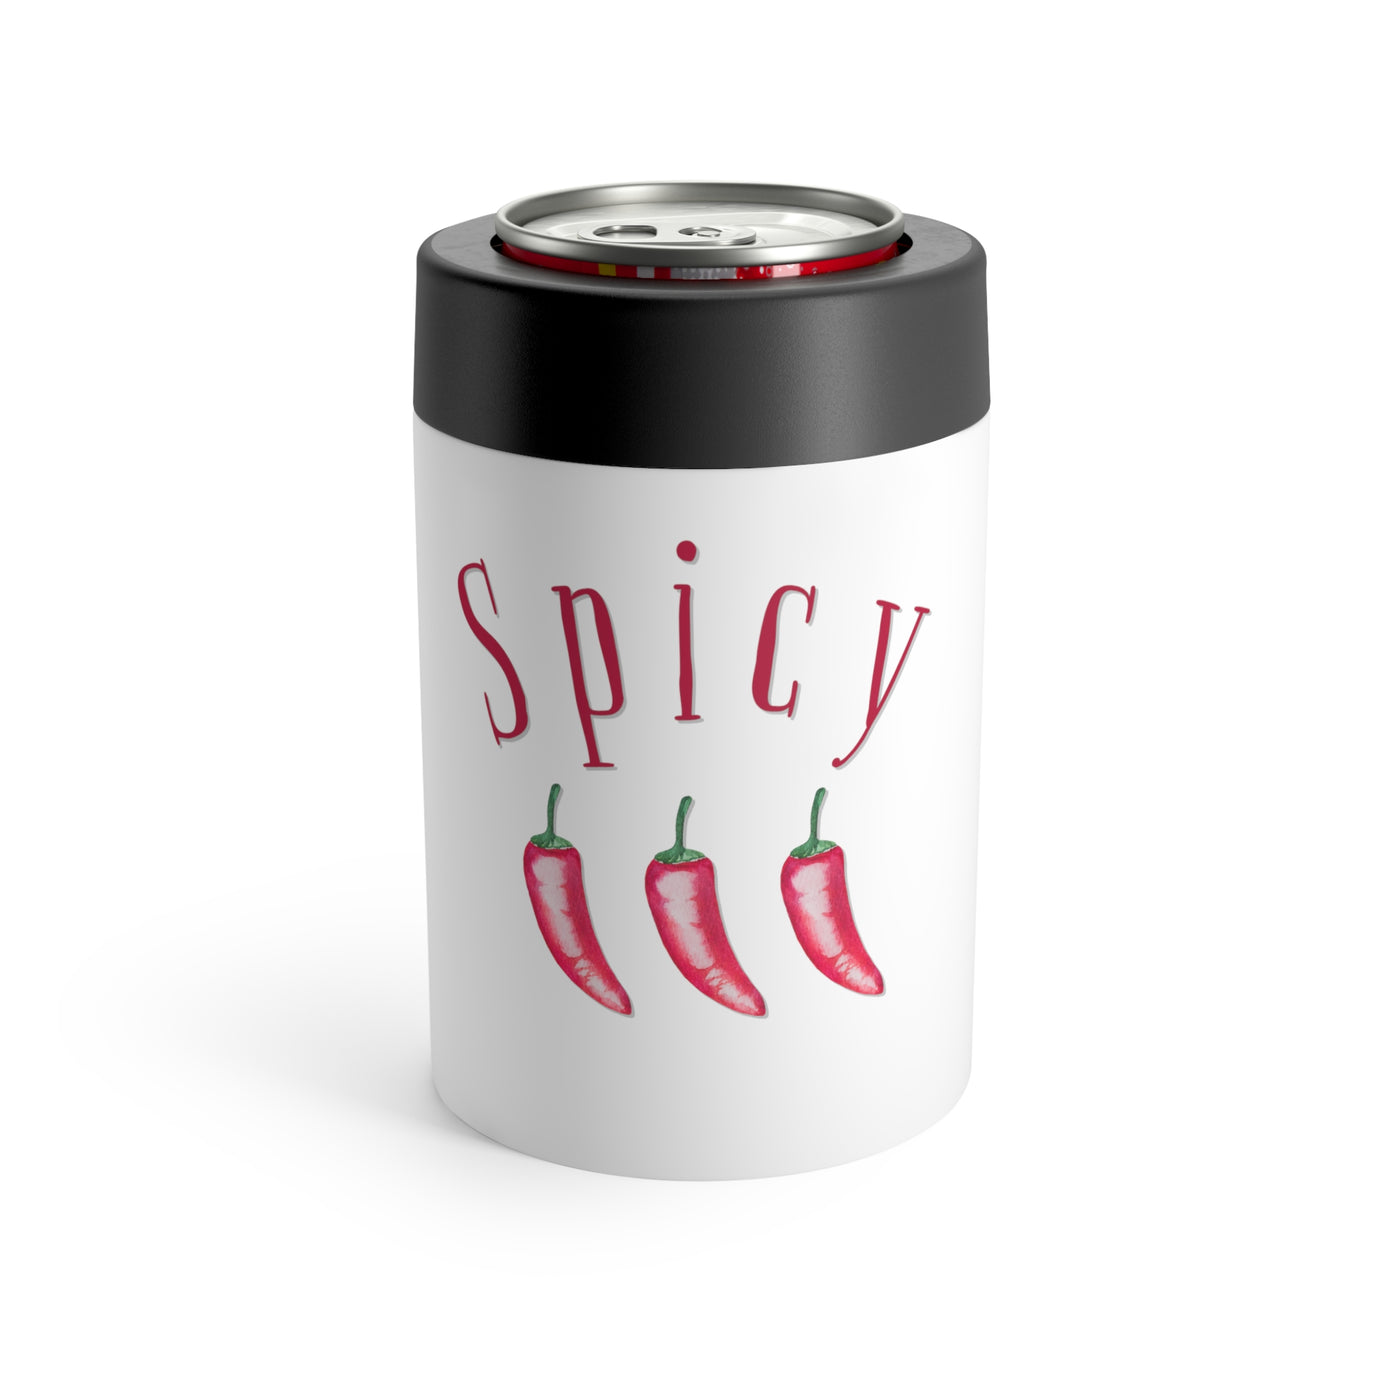 Spicy Stainless Steel Can Holder